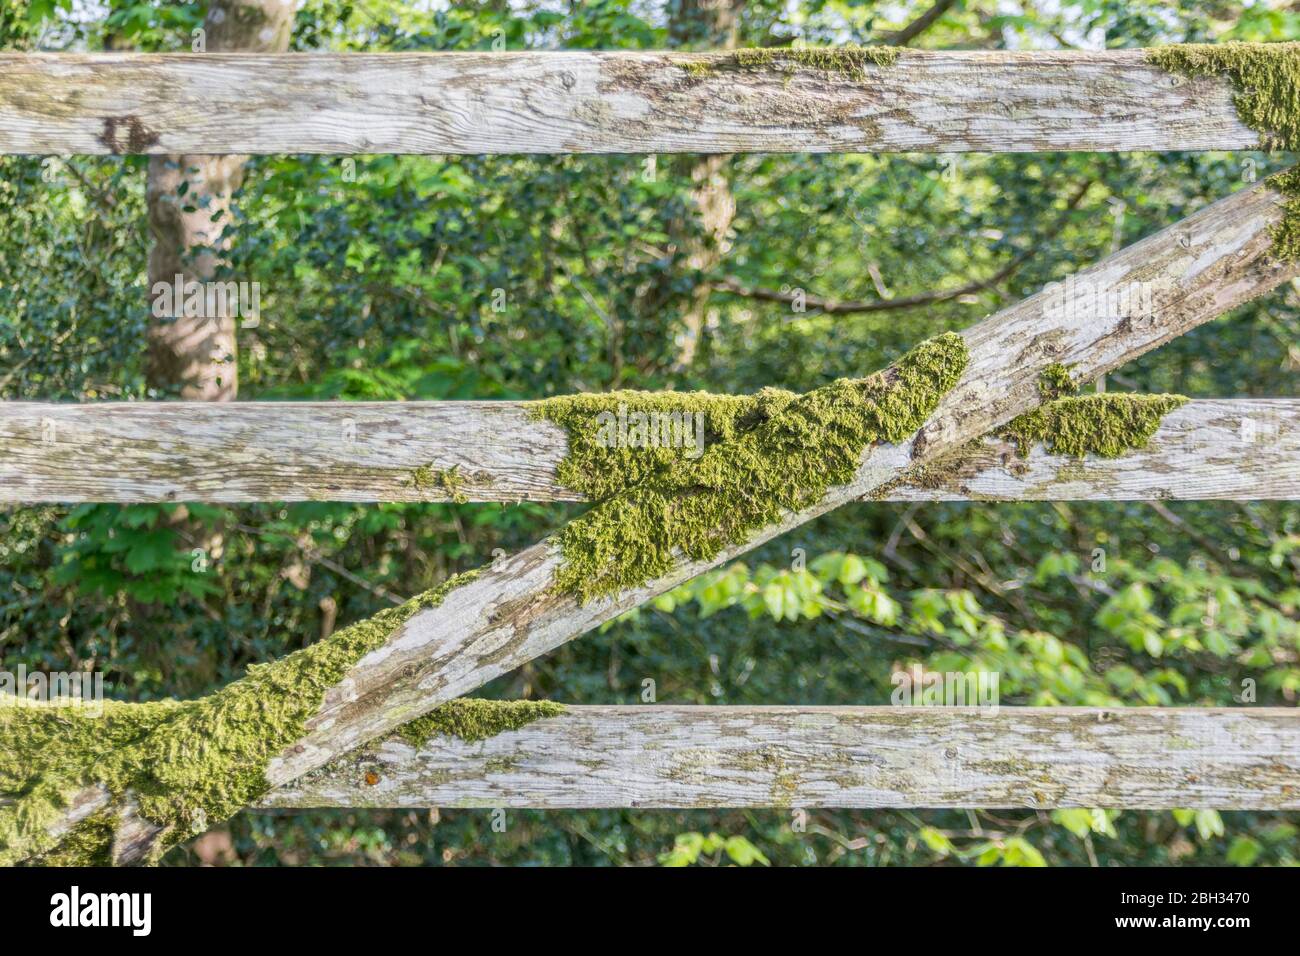 Old wooden farm gate with moss covered strengthening cross brace.Metaphor 'seen better days', a forgotten corner. Monochrome version avail. 2BH3468. Stock Photo